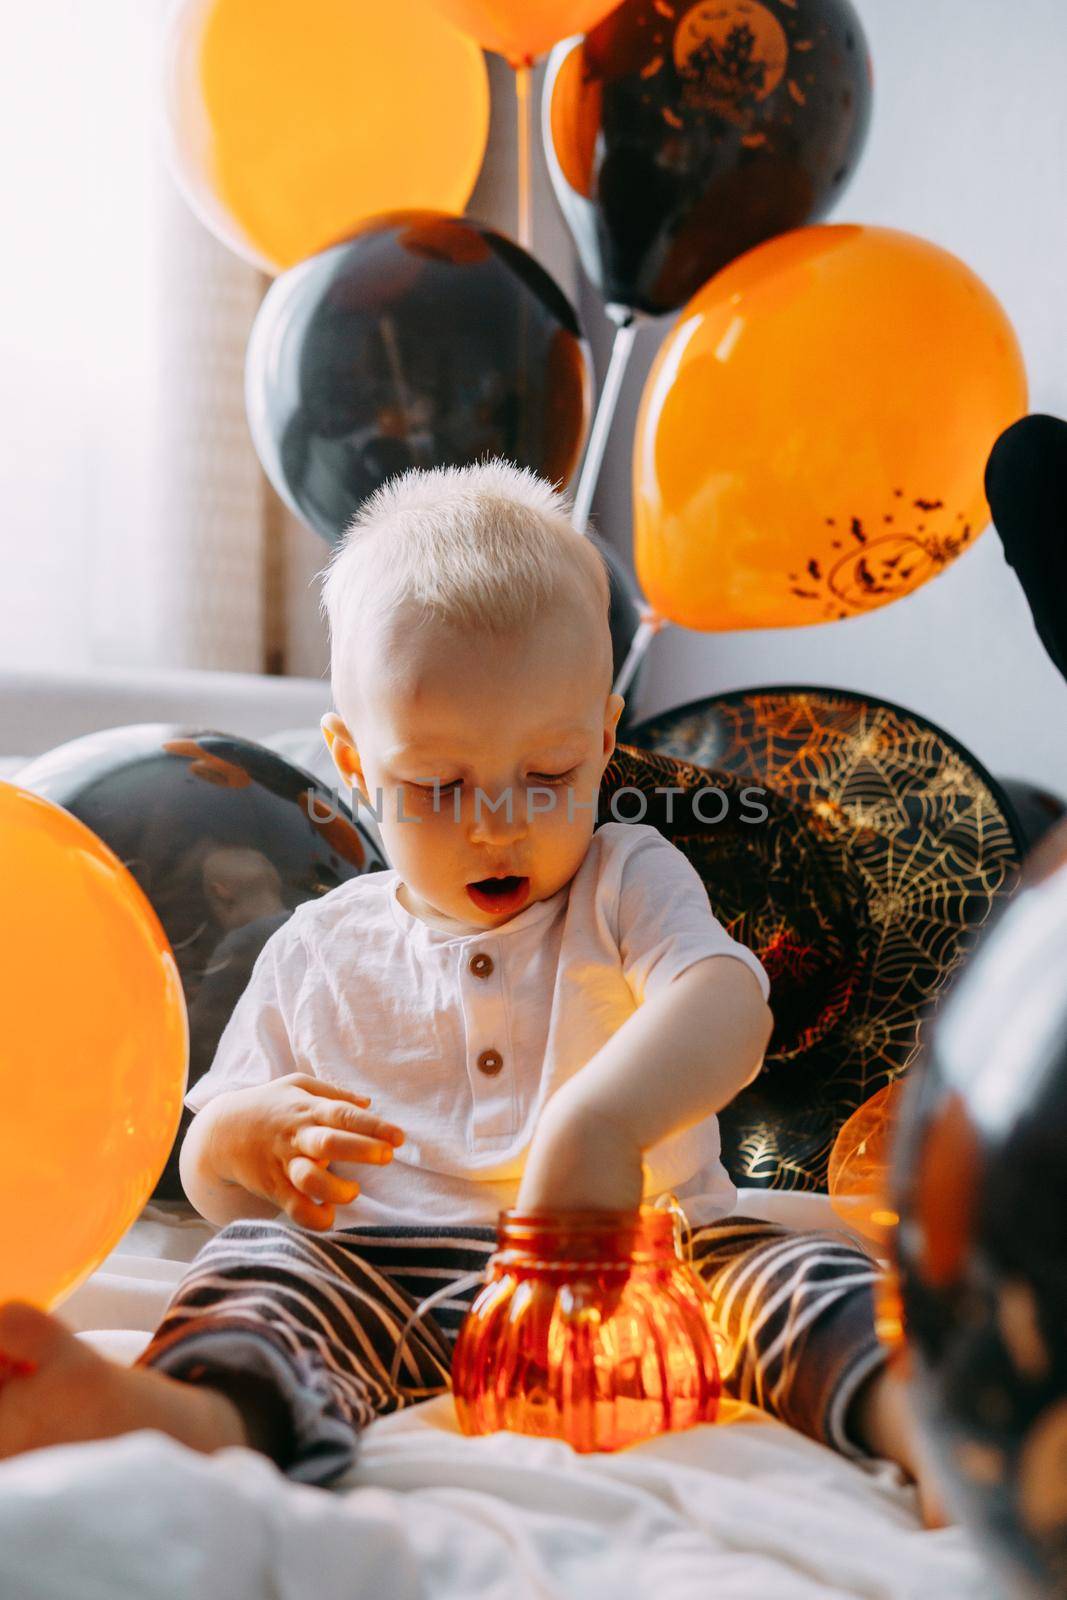 Children's Halloween - a boy in a carnival costume with orange and black balloons at home. Ready to celebrate Halloween